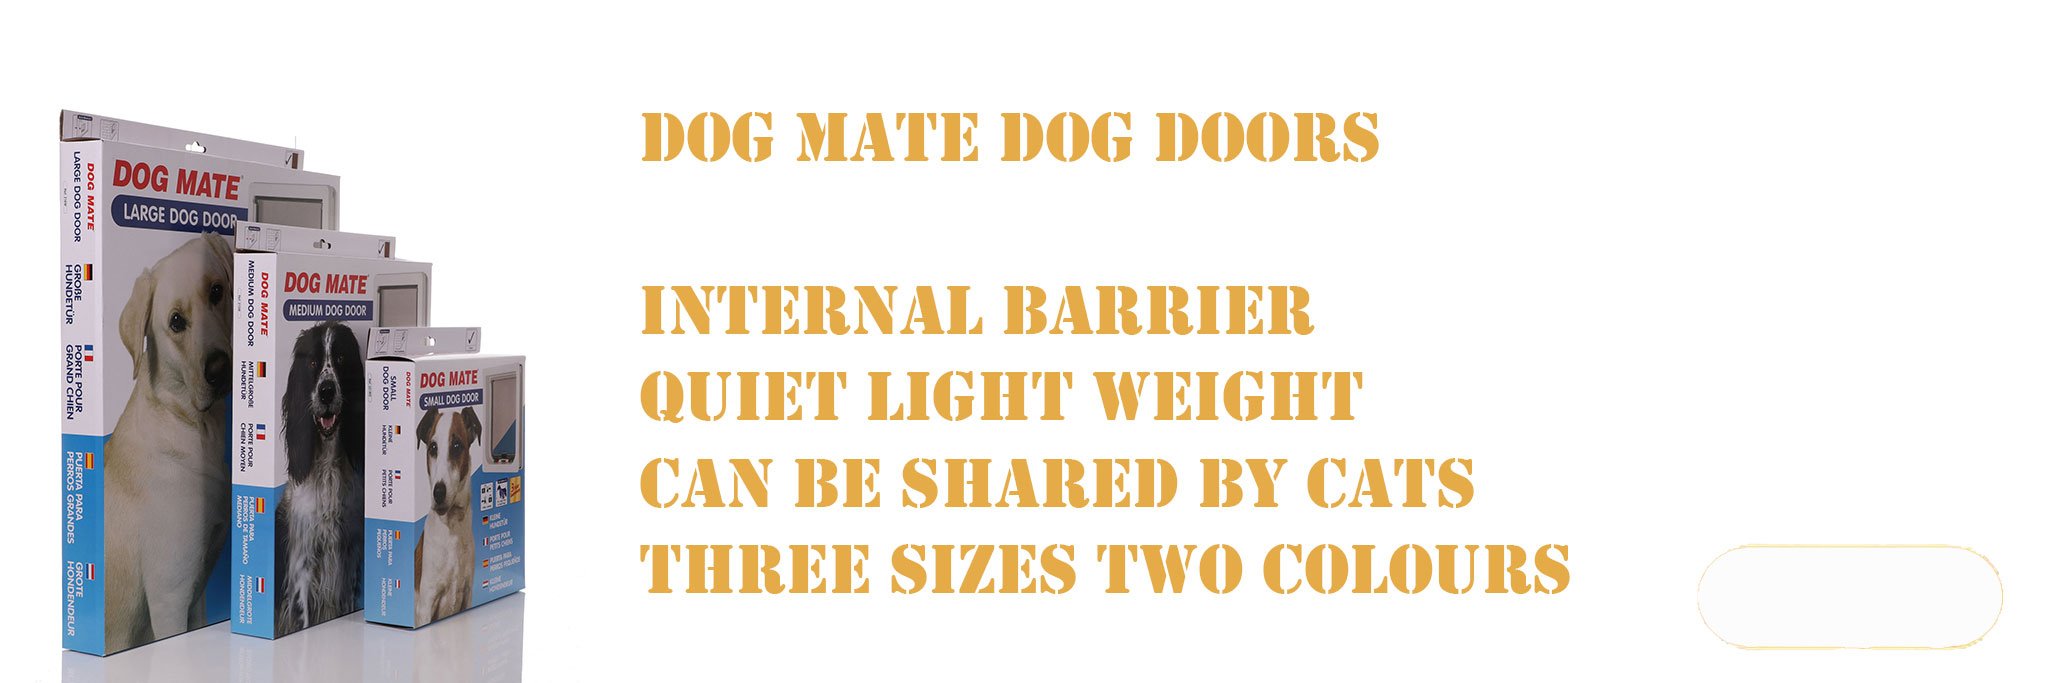 Show the sizes of the Dog Mate door range.